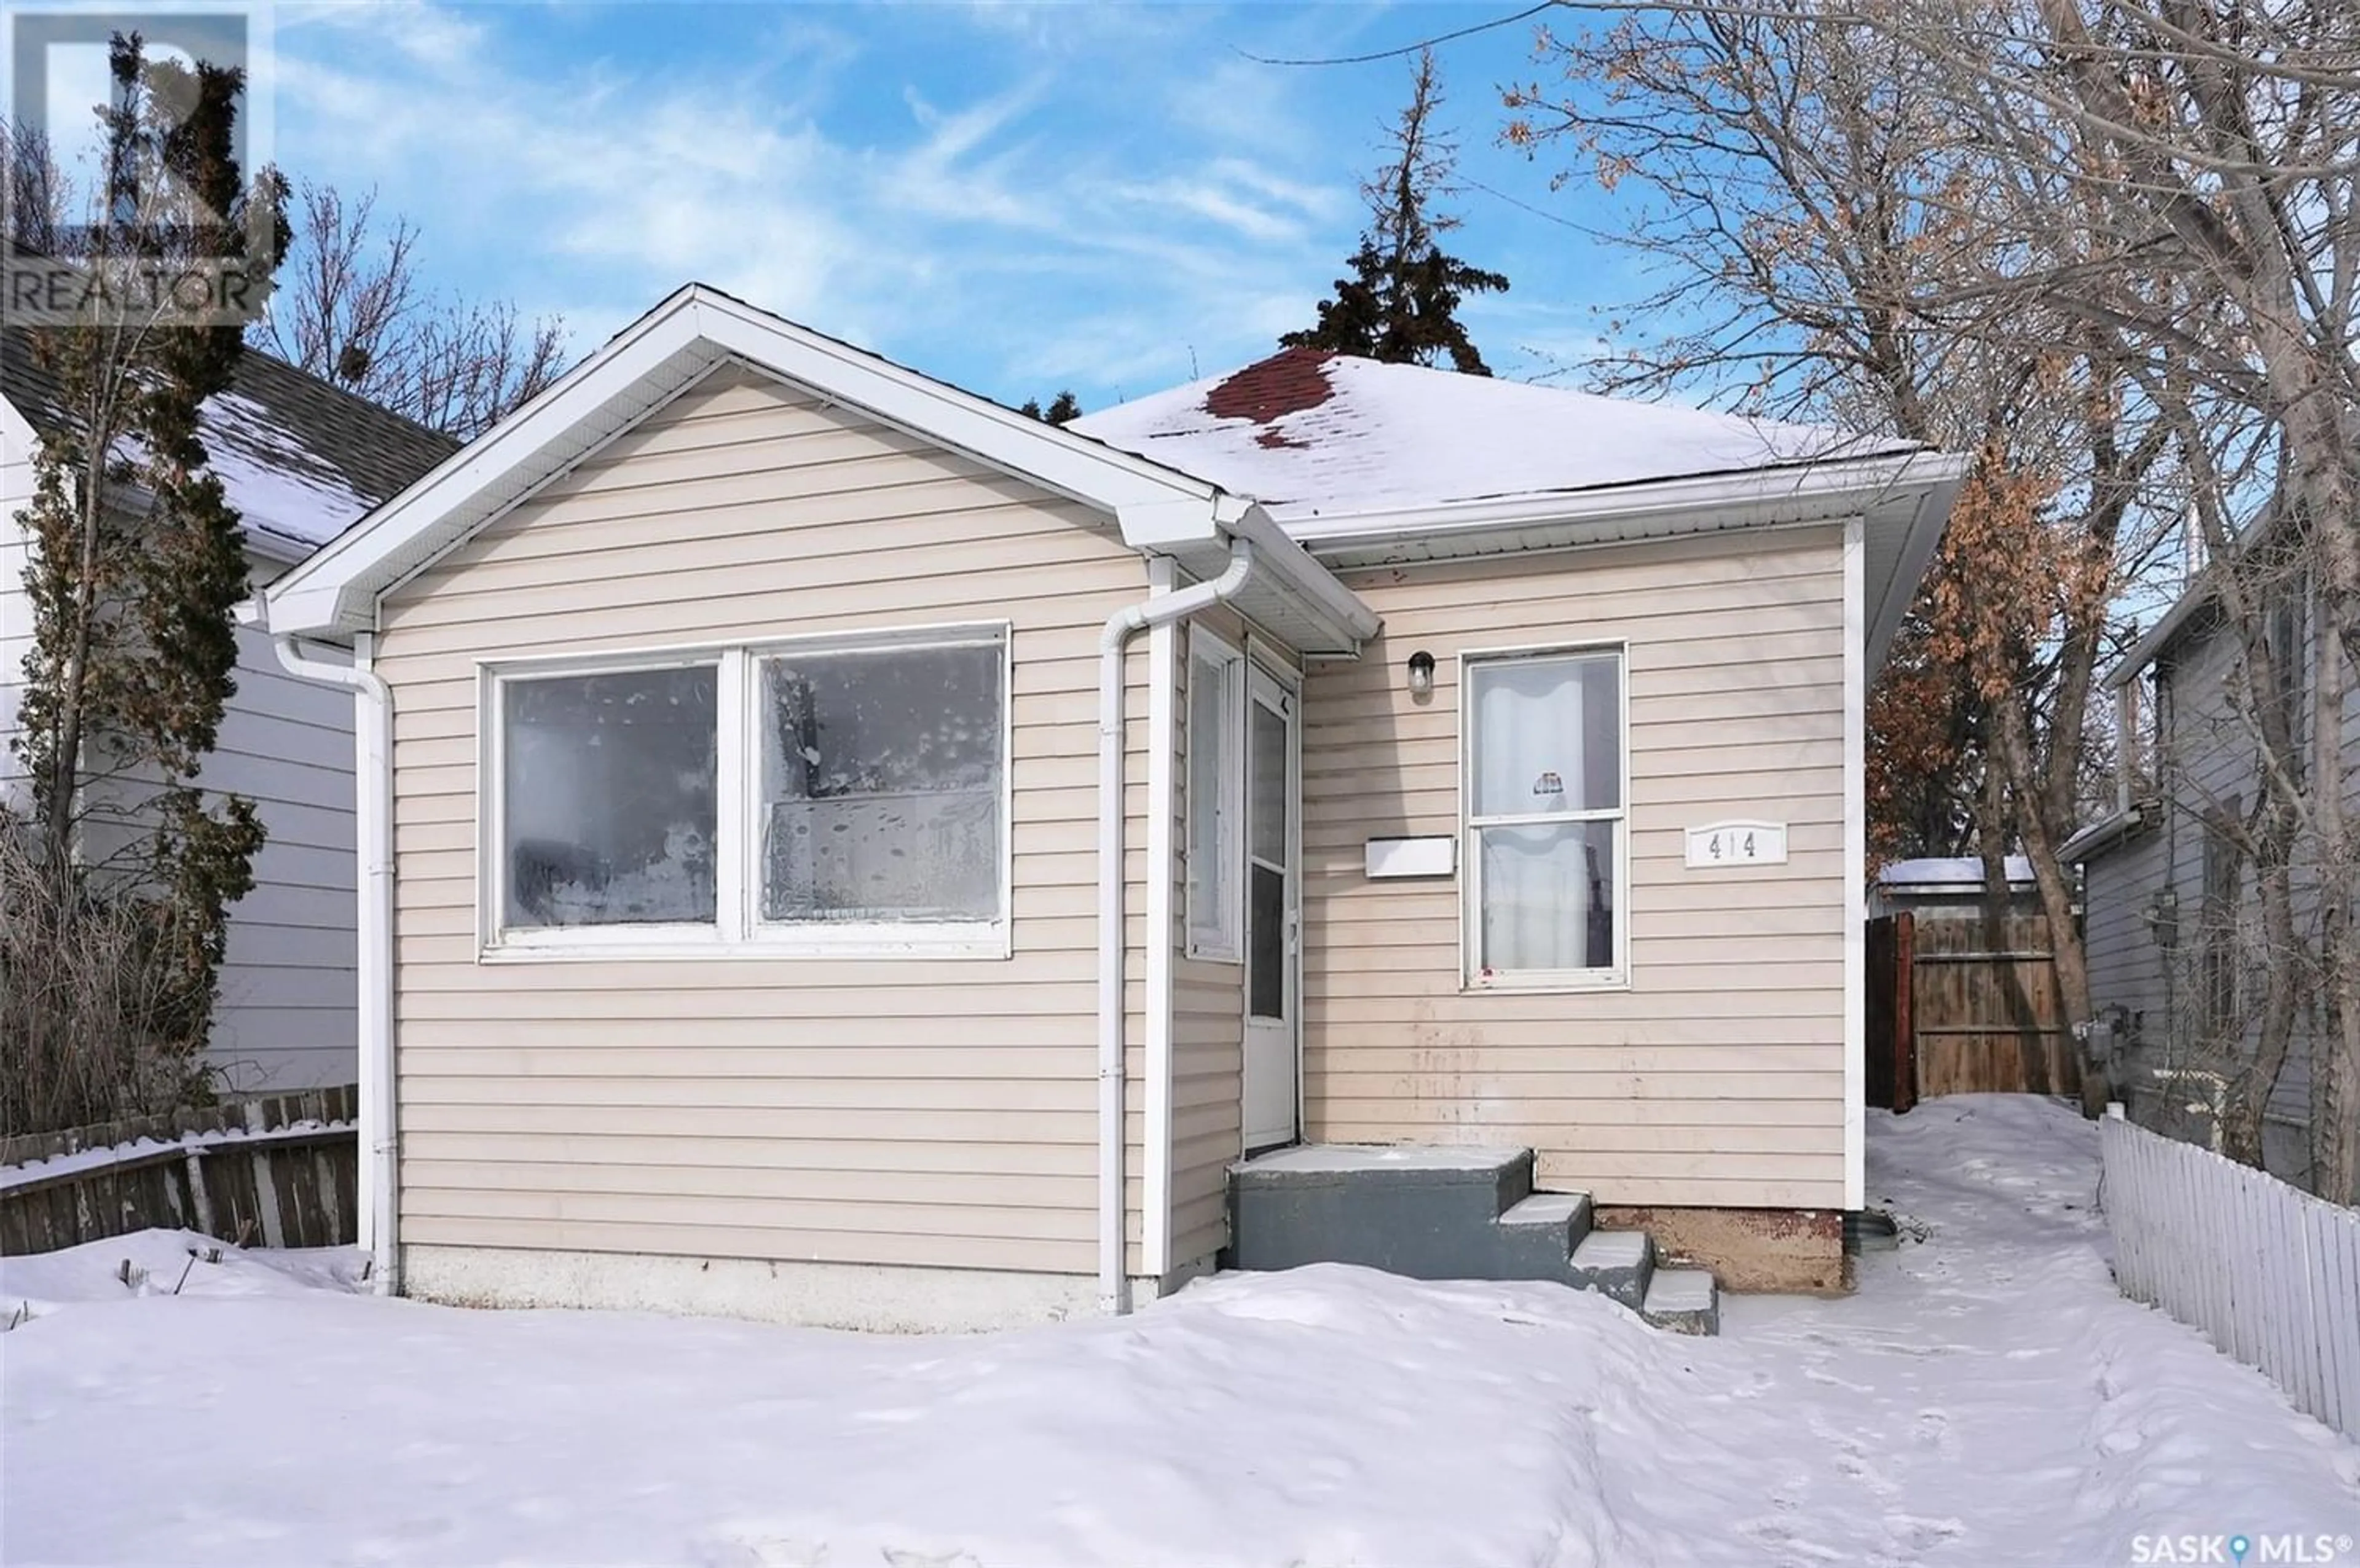 Frontside or backside of a home for 414 FAIRFORD STREET W, Moose Jaw Saskatchewan S6H1W2